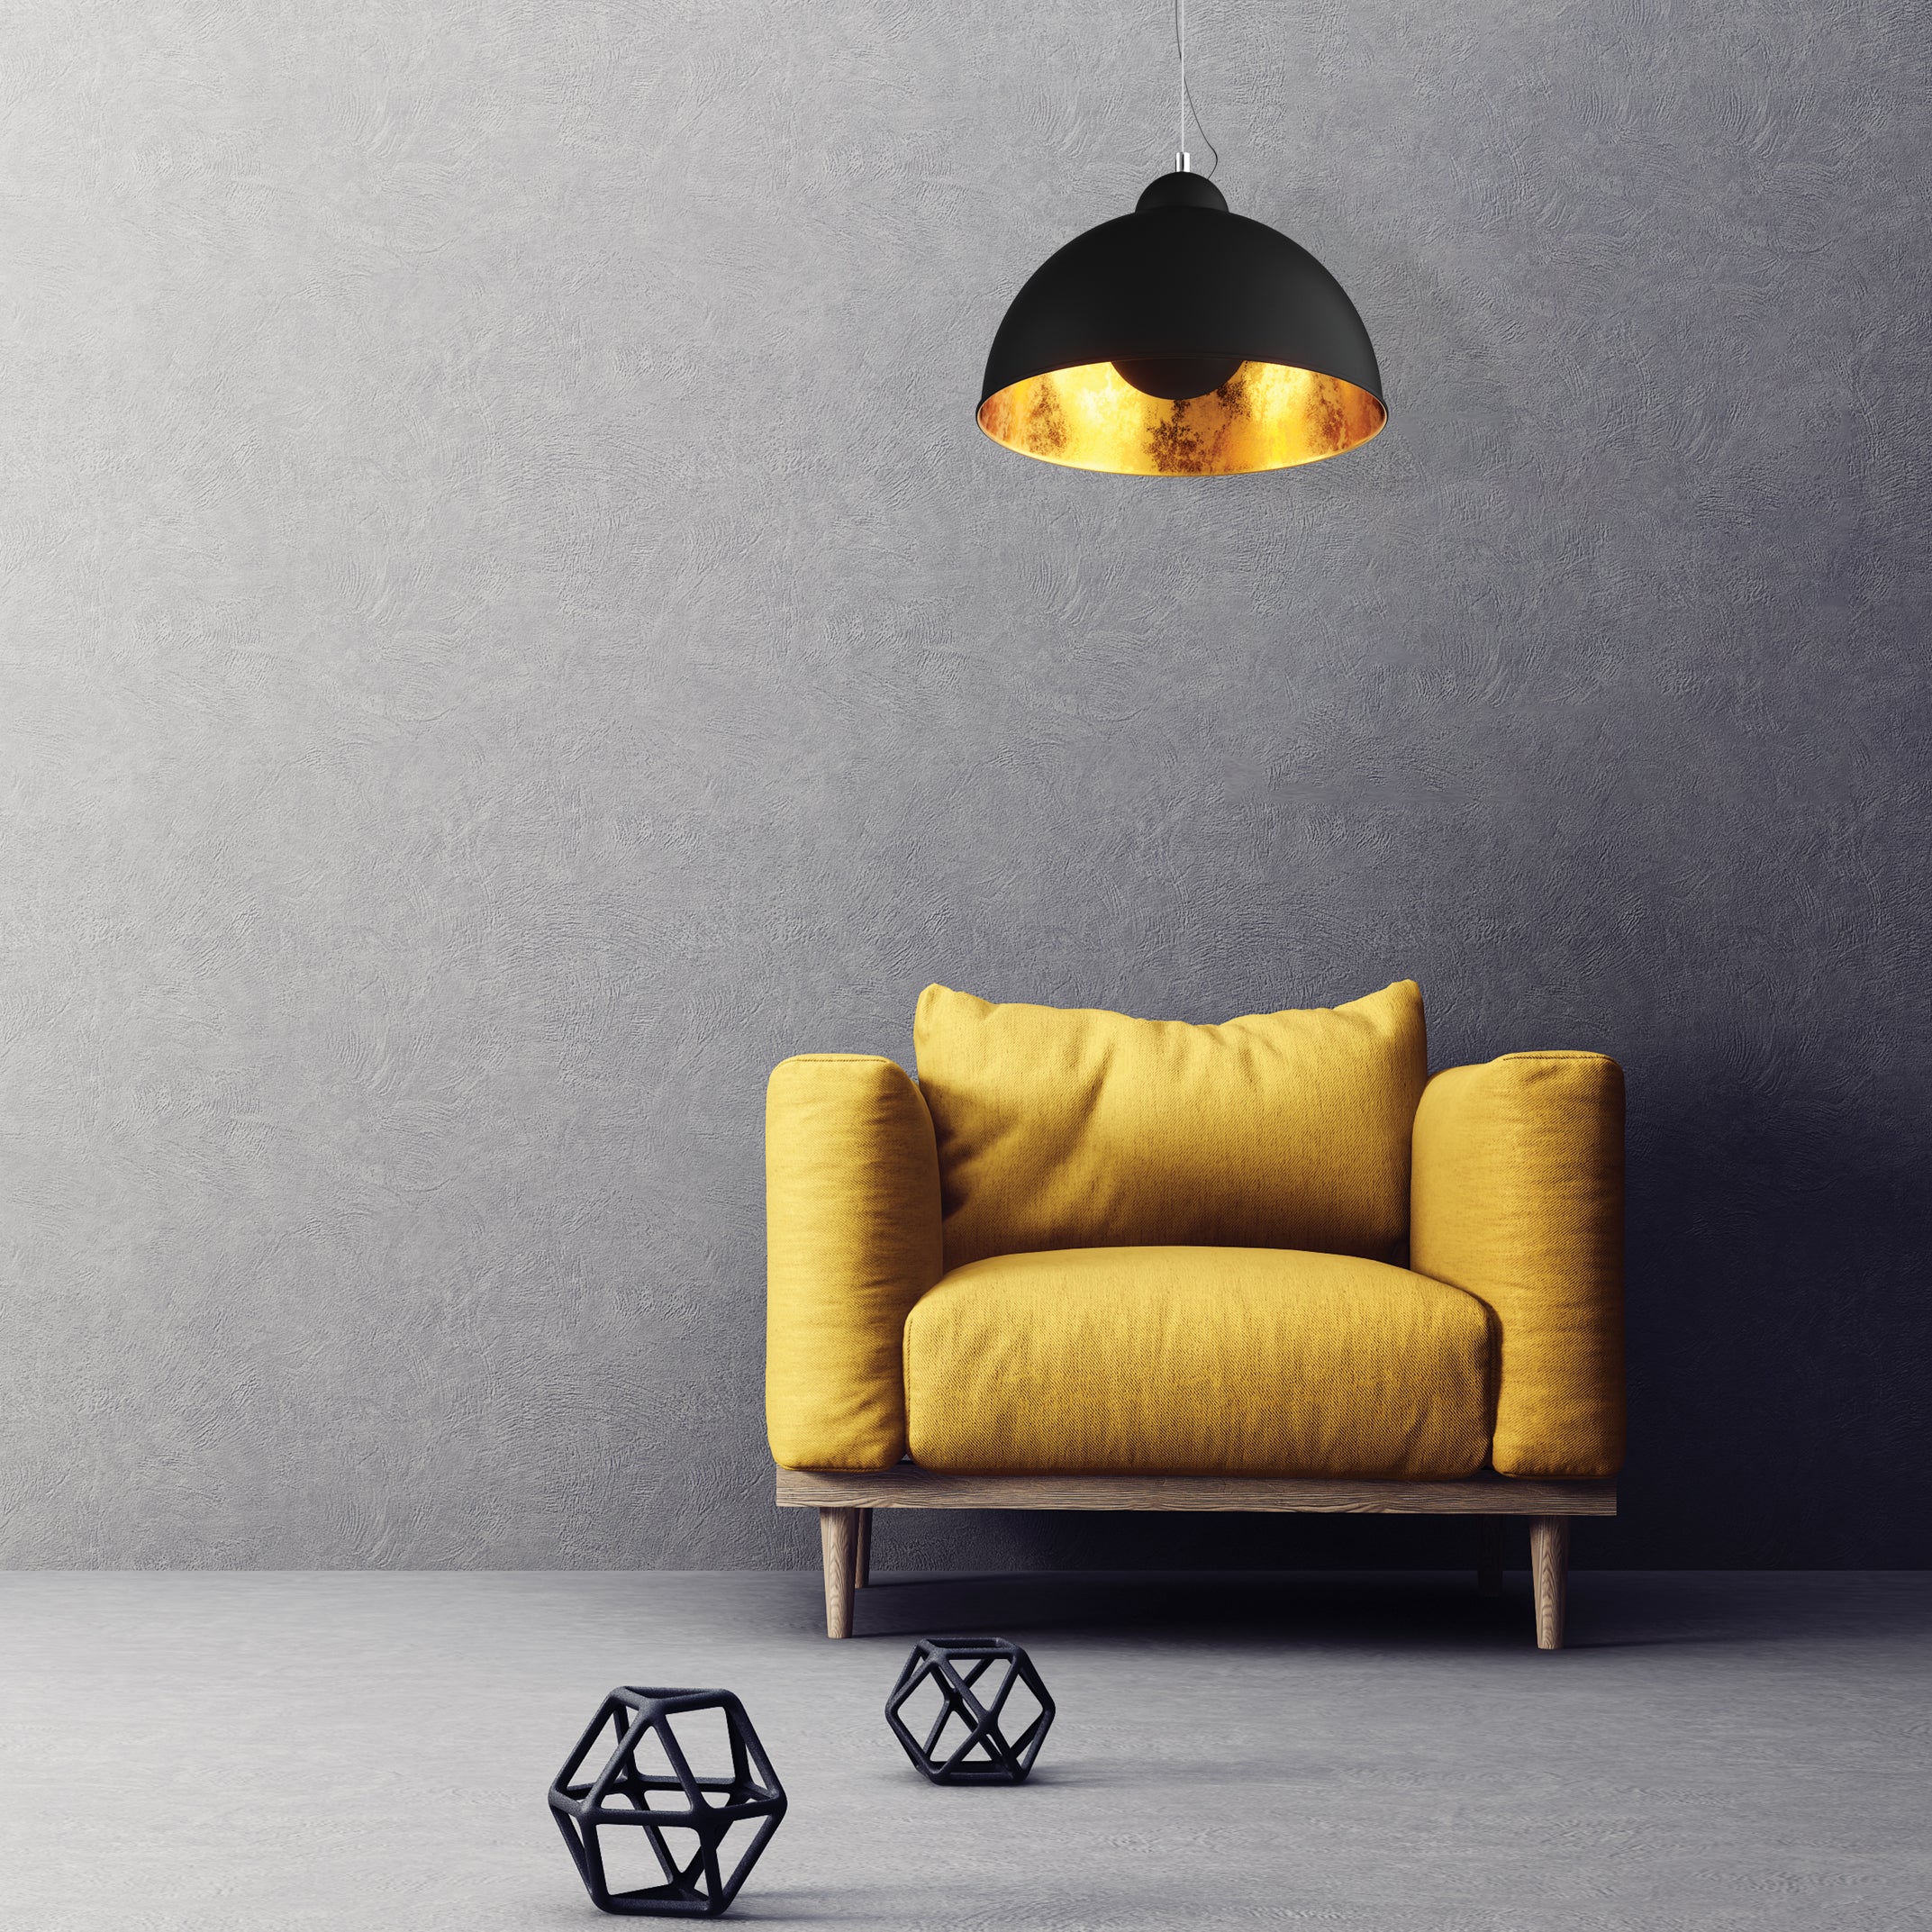 Lighting by Yuvilite. This is a lighting pendant from Zumaline, the Antenne ceiling pendant light which is black and gold inside.